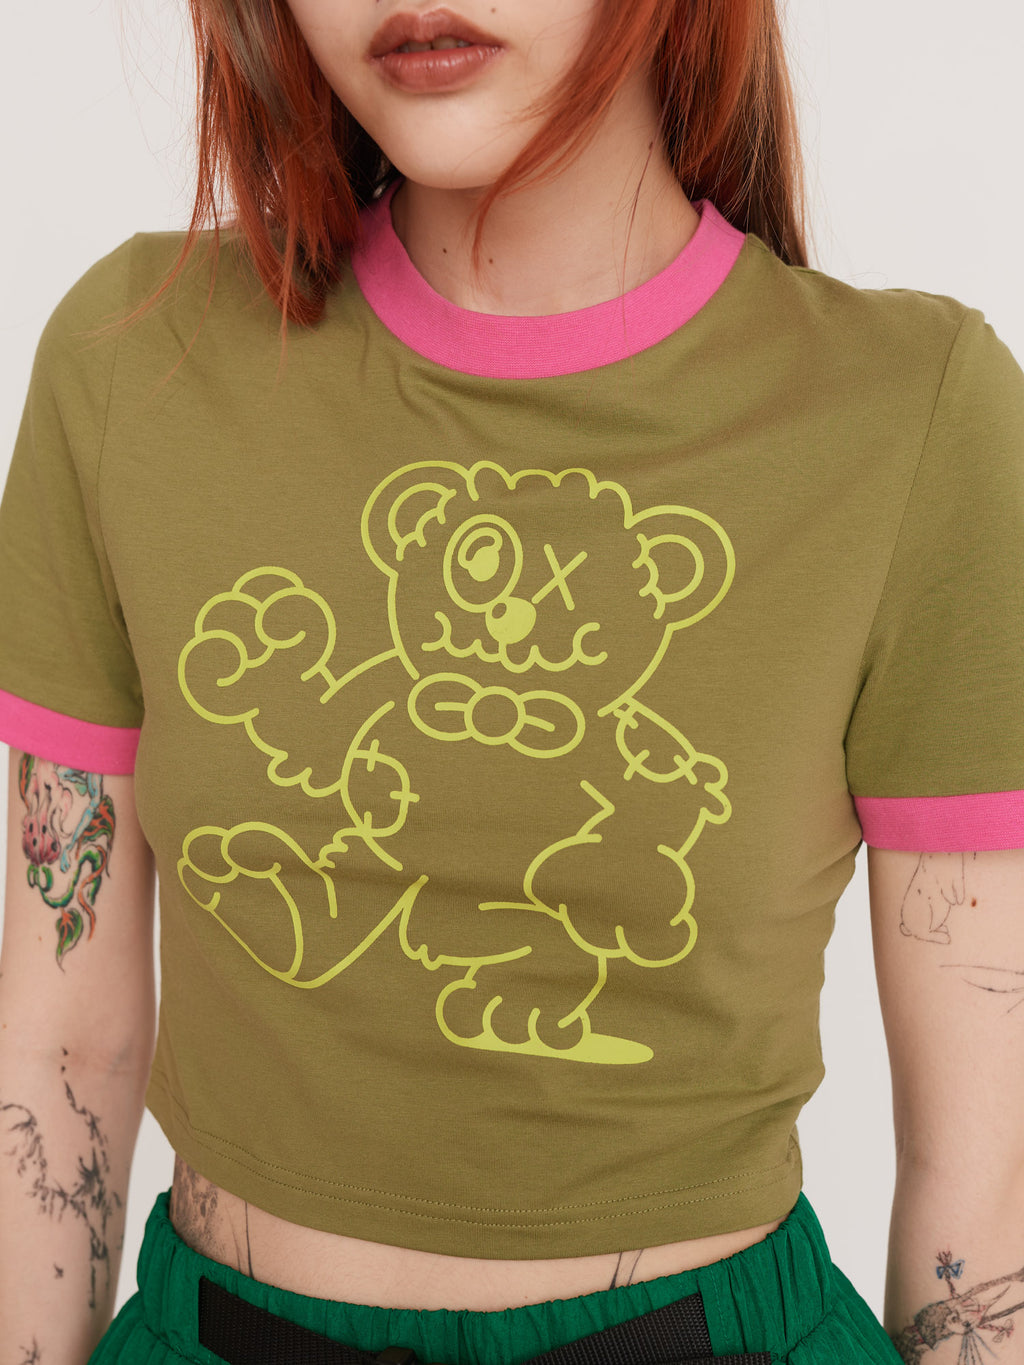 Grin And Bear It Fitted Tee